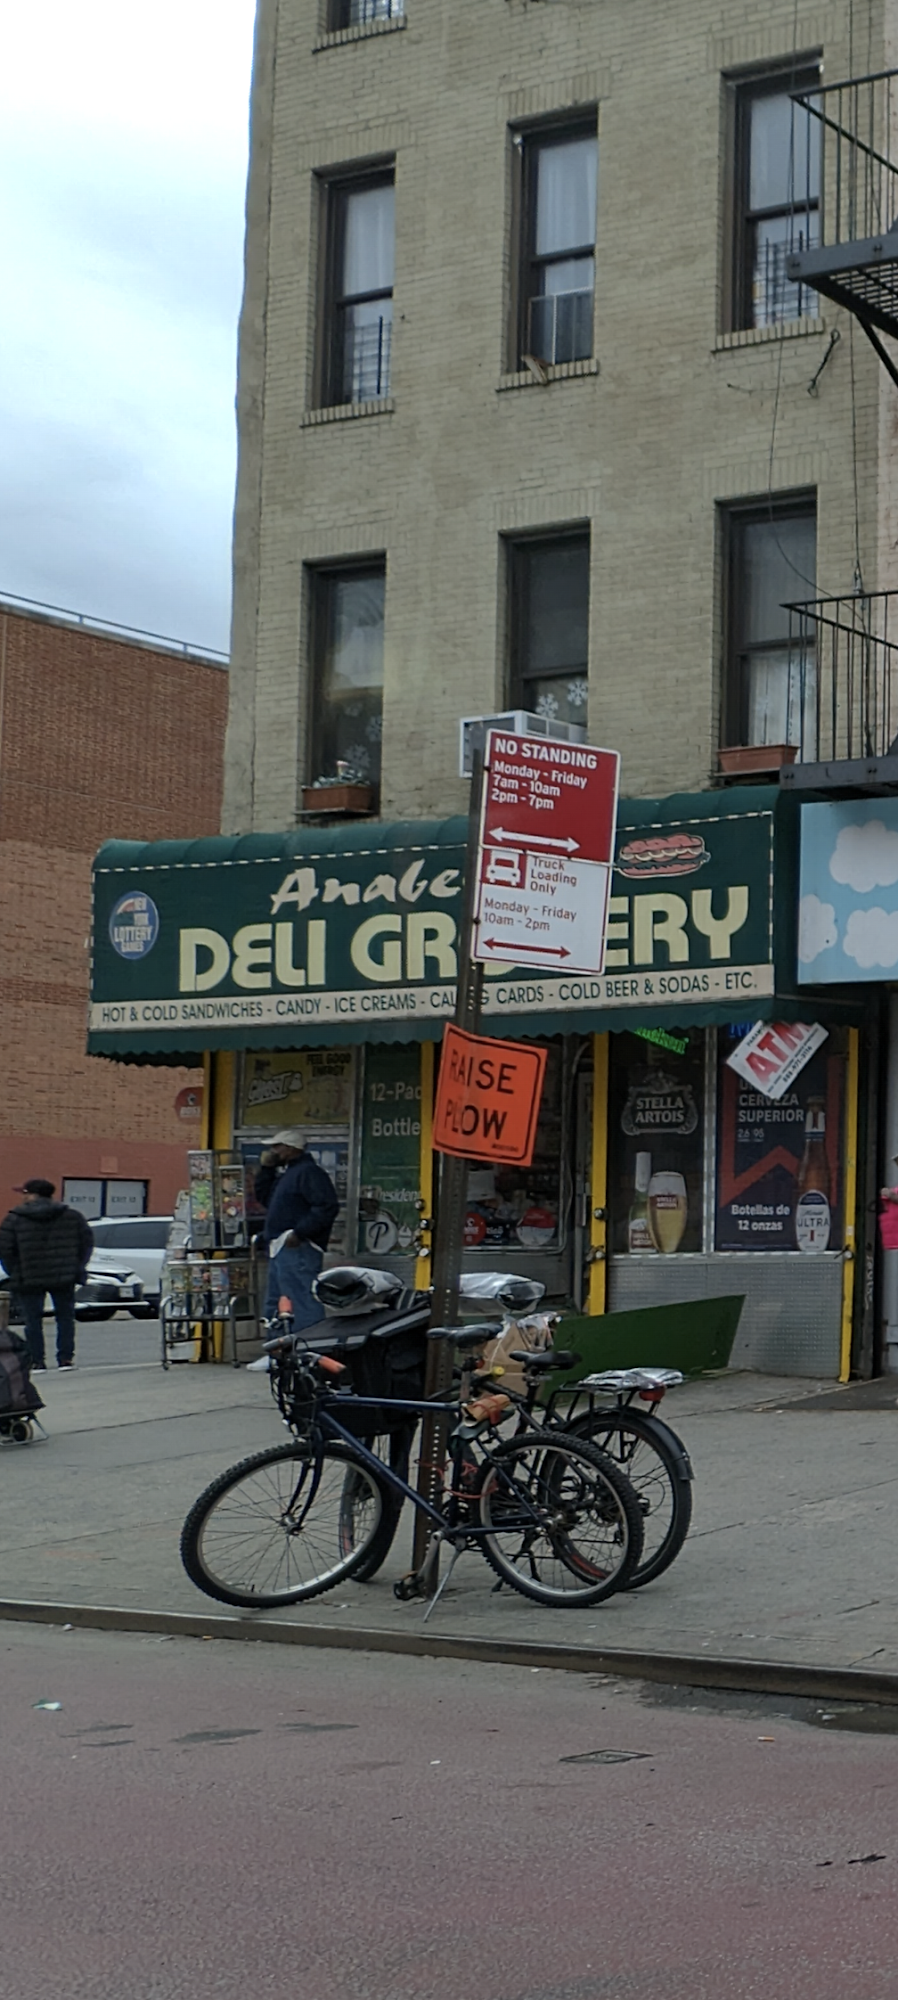 Anabelle Deli Grocery